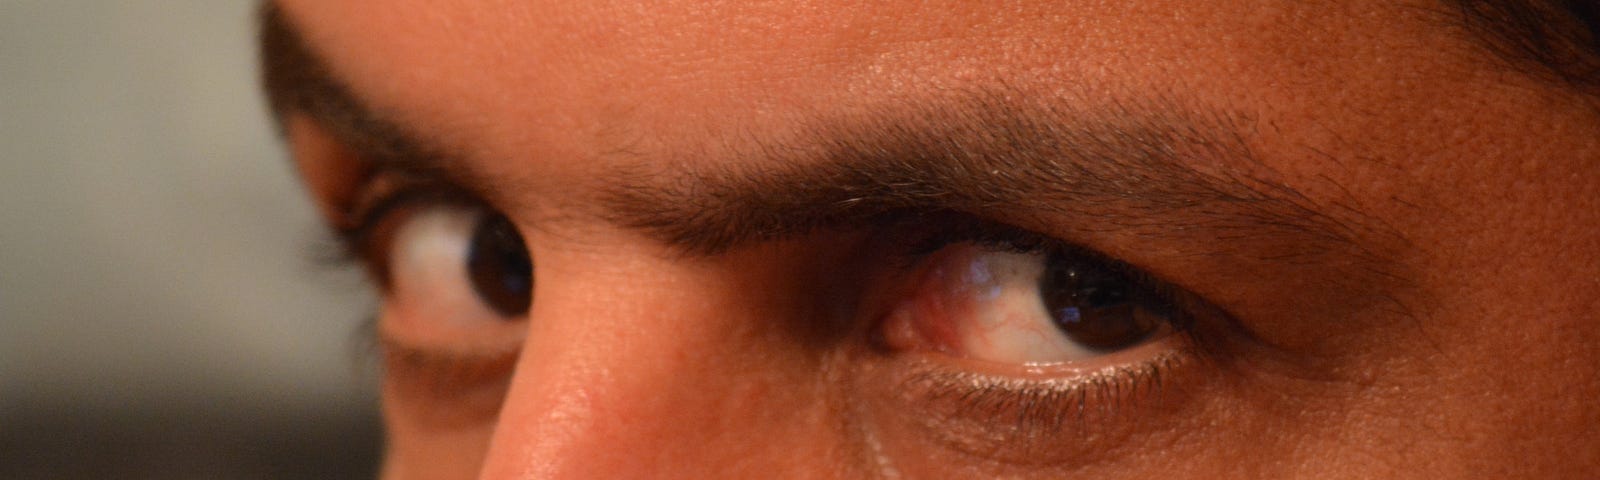 A man’s angry eyes stare closely into the camera.